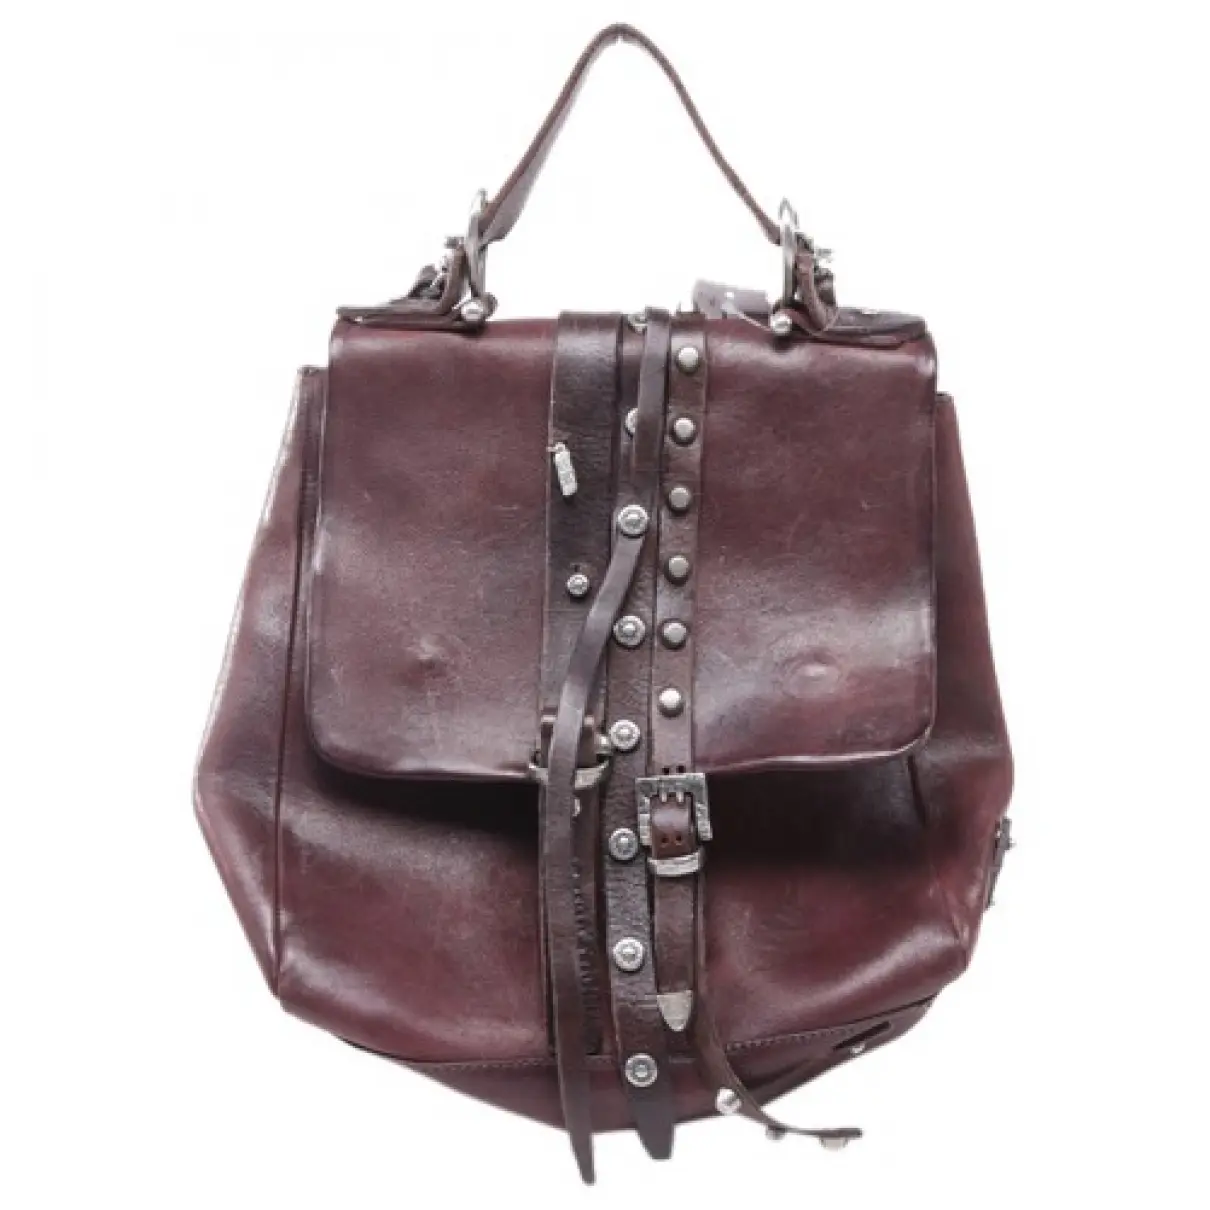 Leather bag A.S.98